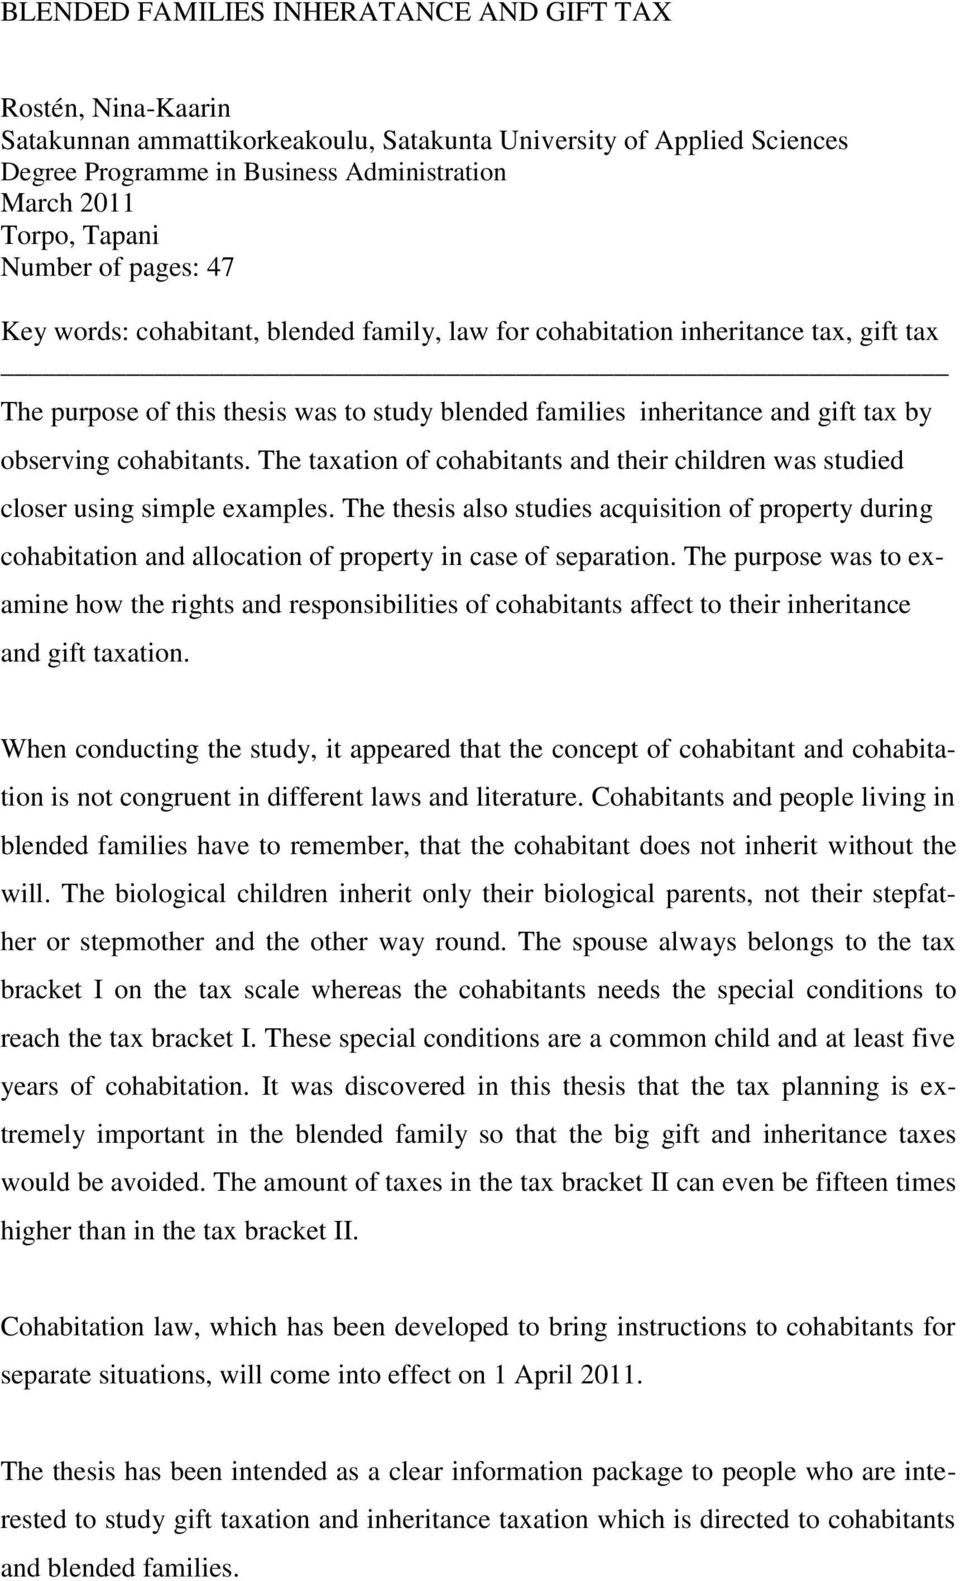 observing cohabitants. The taxation of cohabitants and their children was studied closer using simple examples.